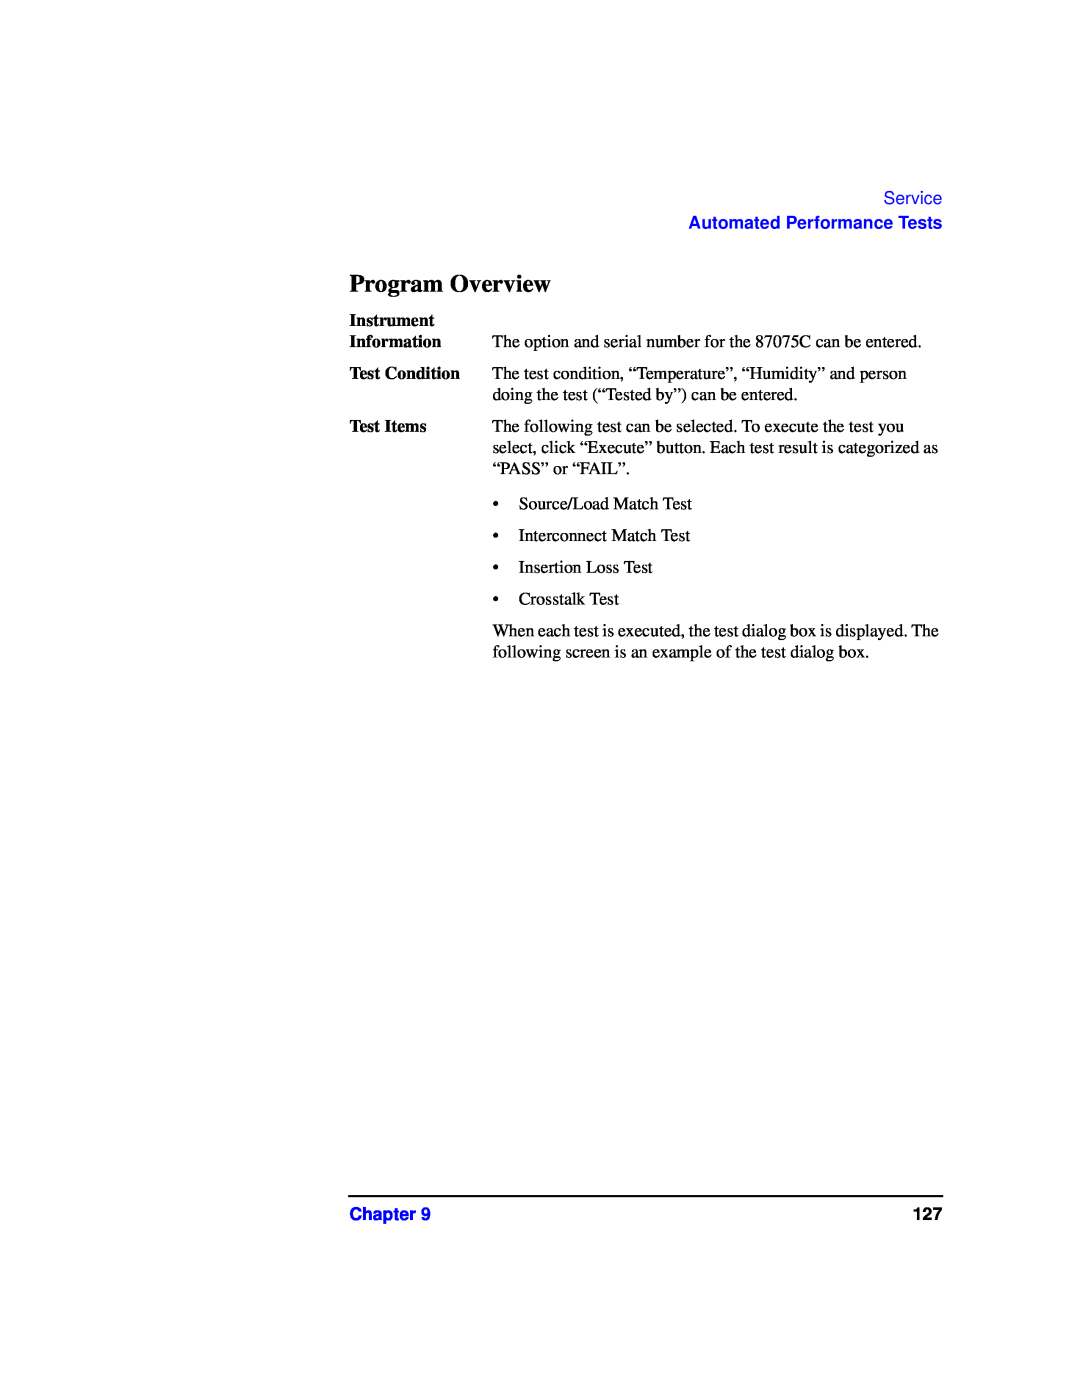 Agilent Technologies 87075C Program Overview, Service, Automated Performance Tests, Instrument, Information, Test Items 